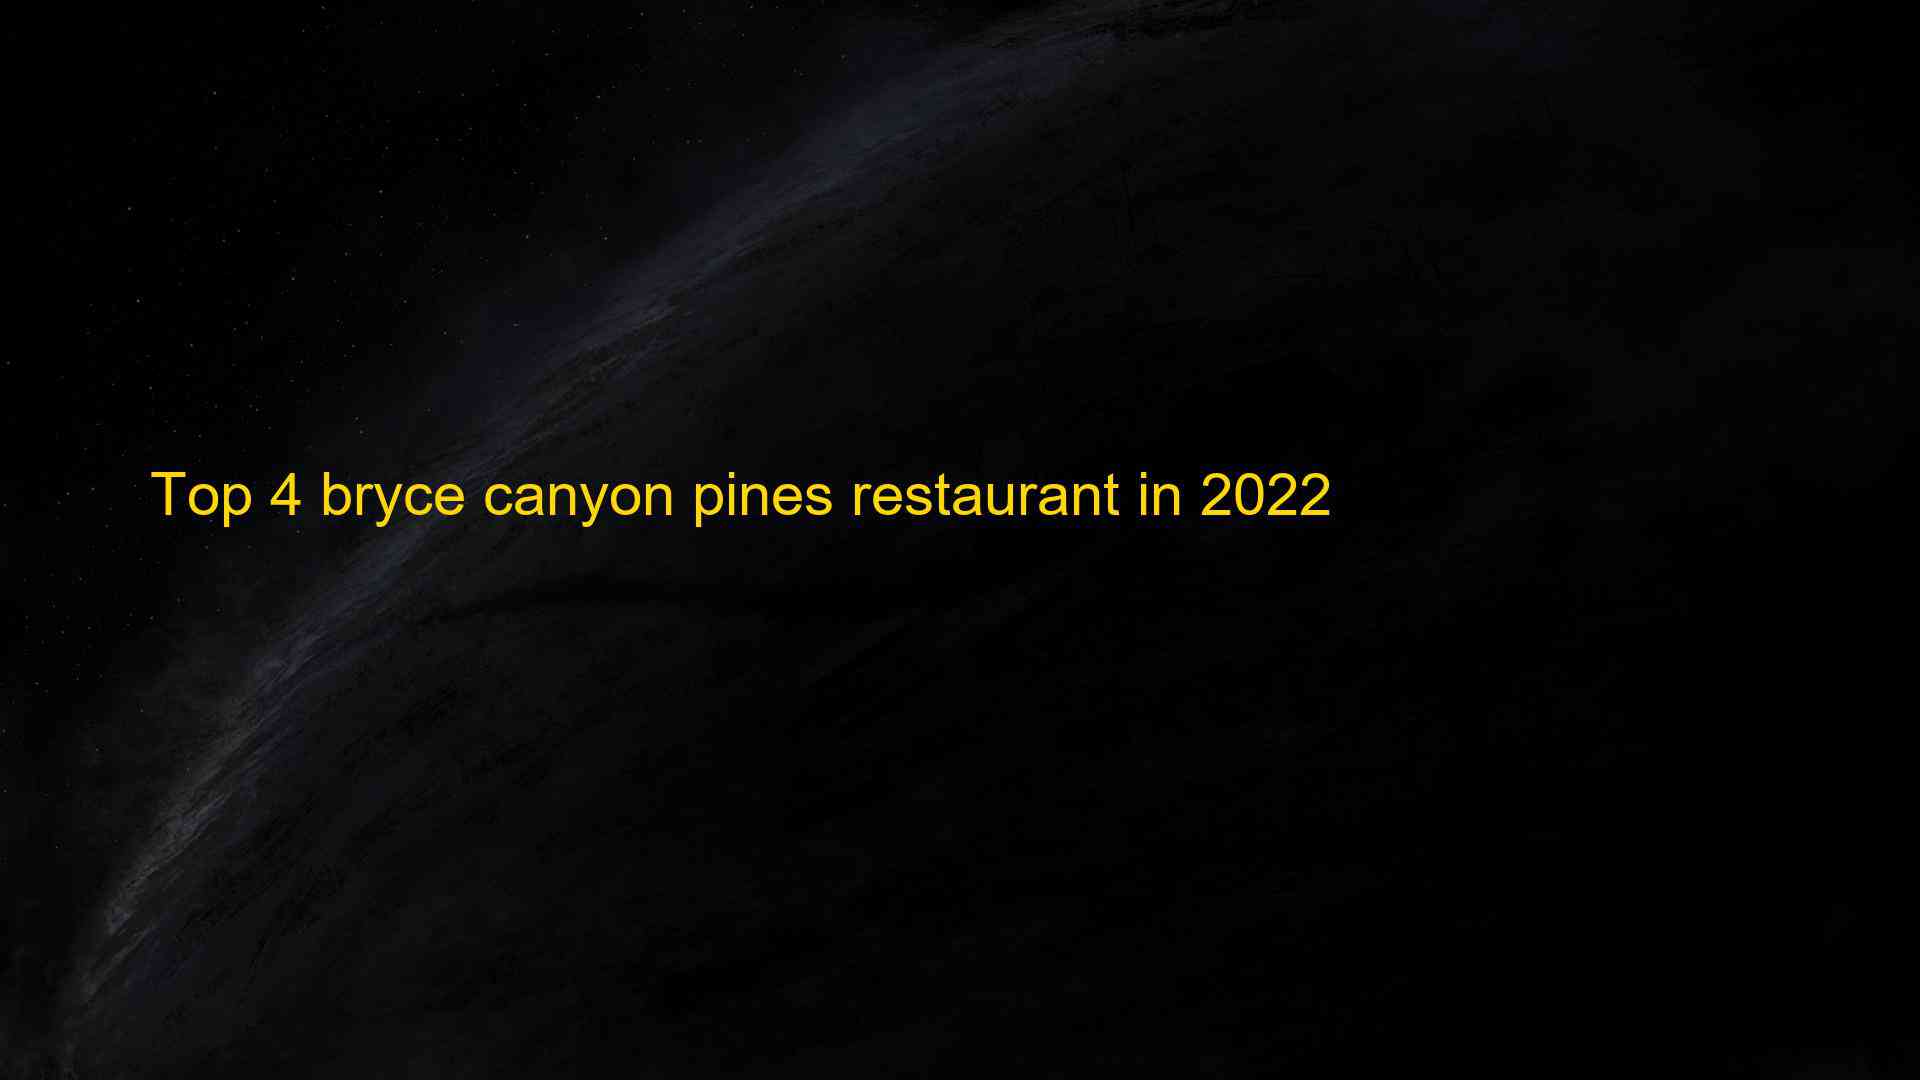 Top 4 bryce canyon pines restaurant in 2022 1663522577